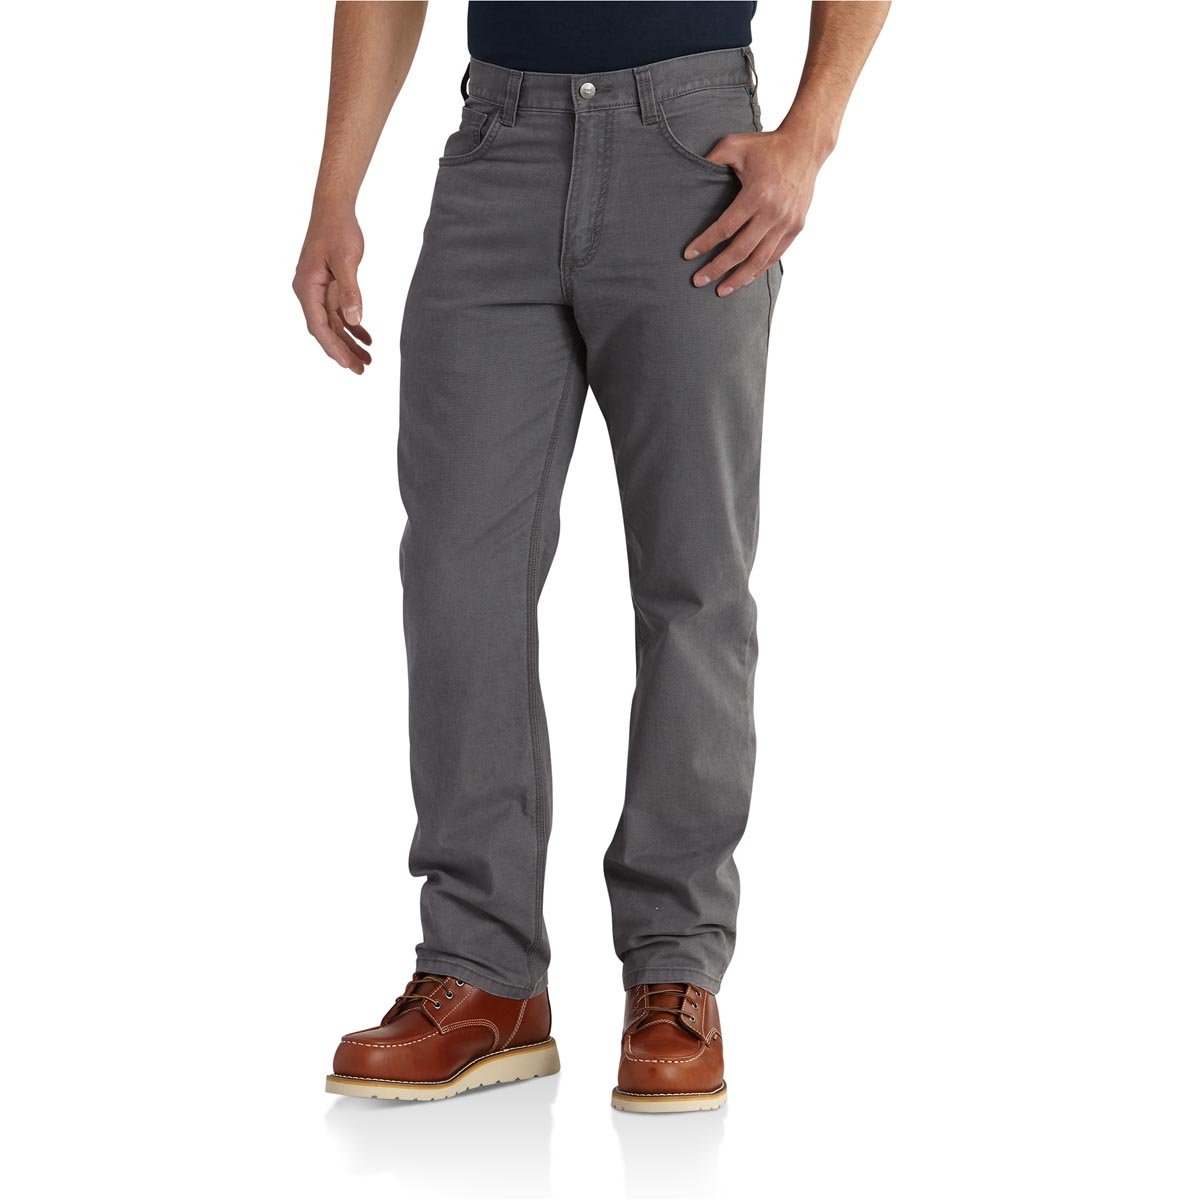 Carhartt Mens 5 Pocket Relaxed Fit Pant